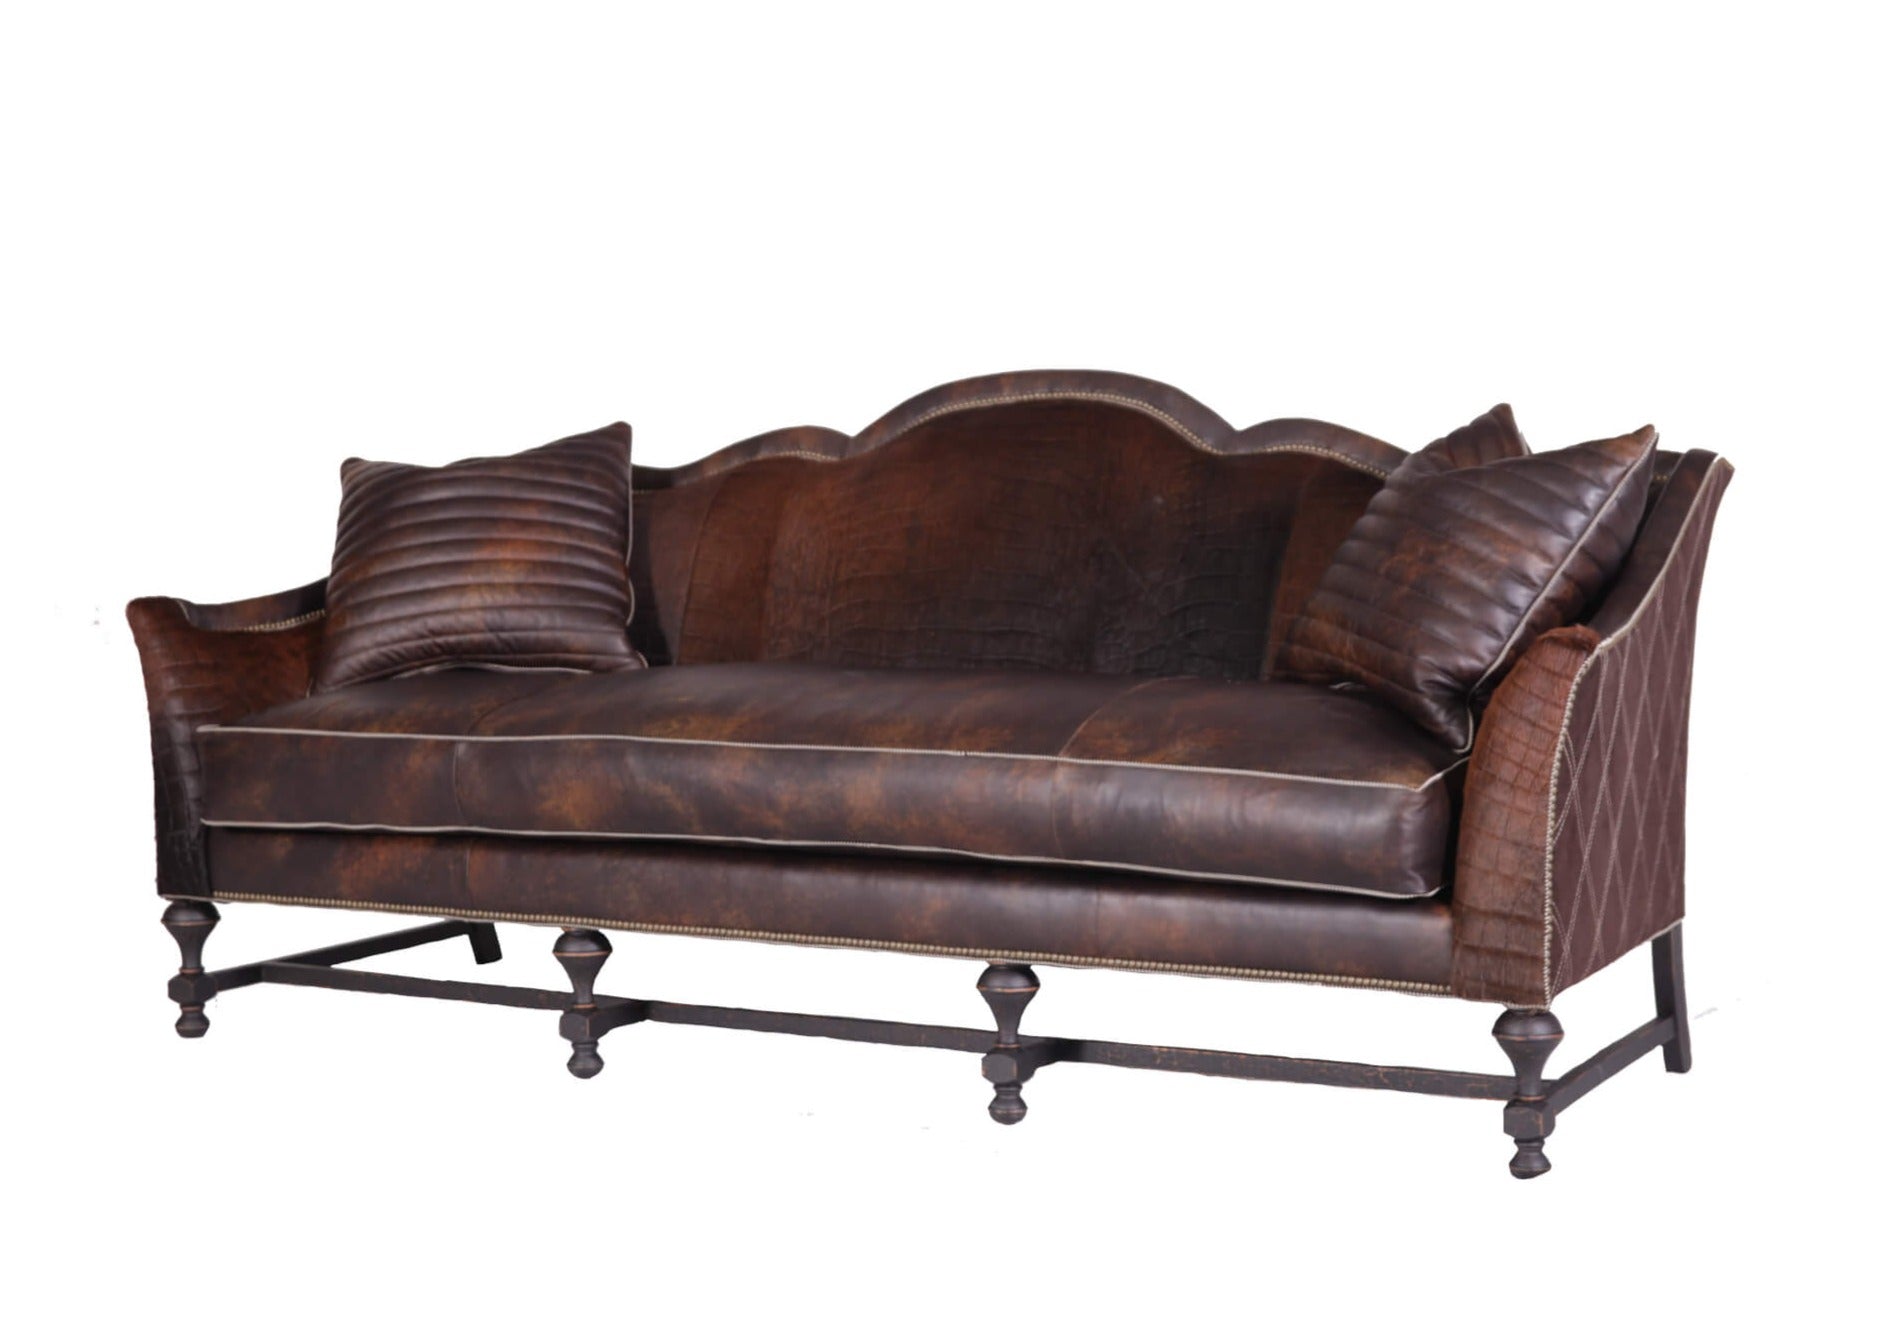 The French Country Sofa brings classic style to the living room. Featured in fabric upholstery or leather, plus stylish nailhead trim, it provides a luxurious, timeless look. Create a homey atmosphere and add a touch of elegance to your space.